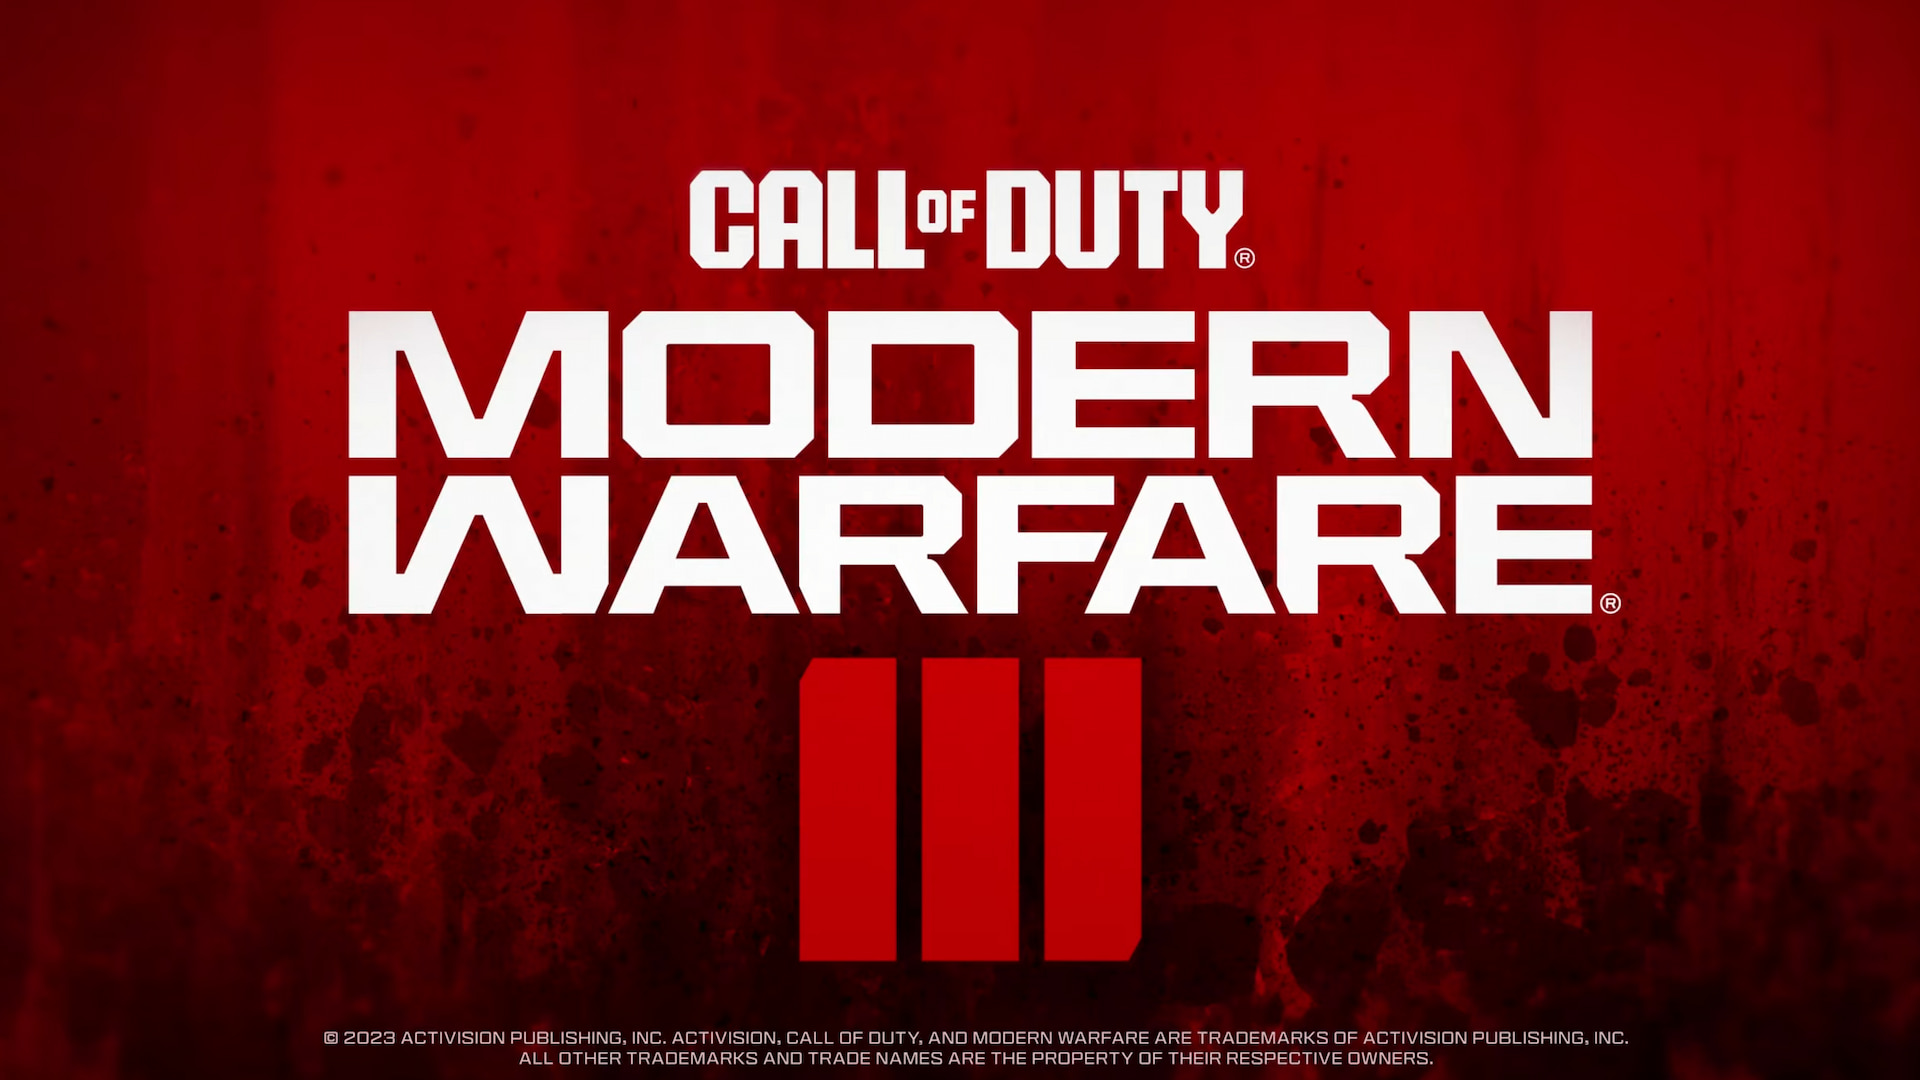 How to Get Early Access to Call of Duty: Modern Warfare 3 (CoD: MW3)